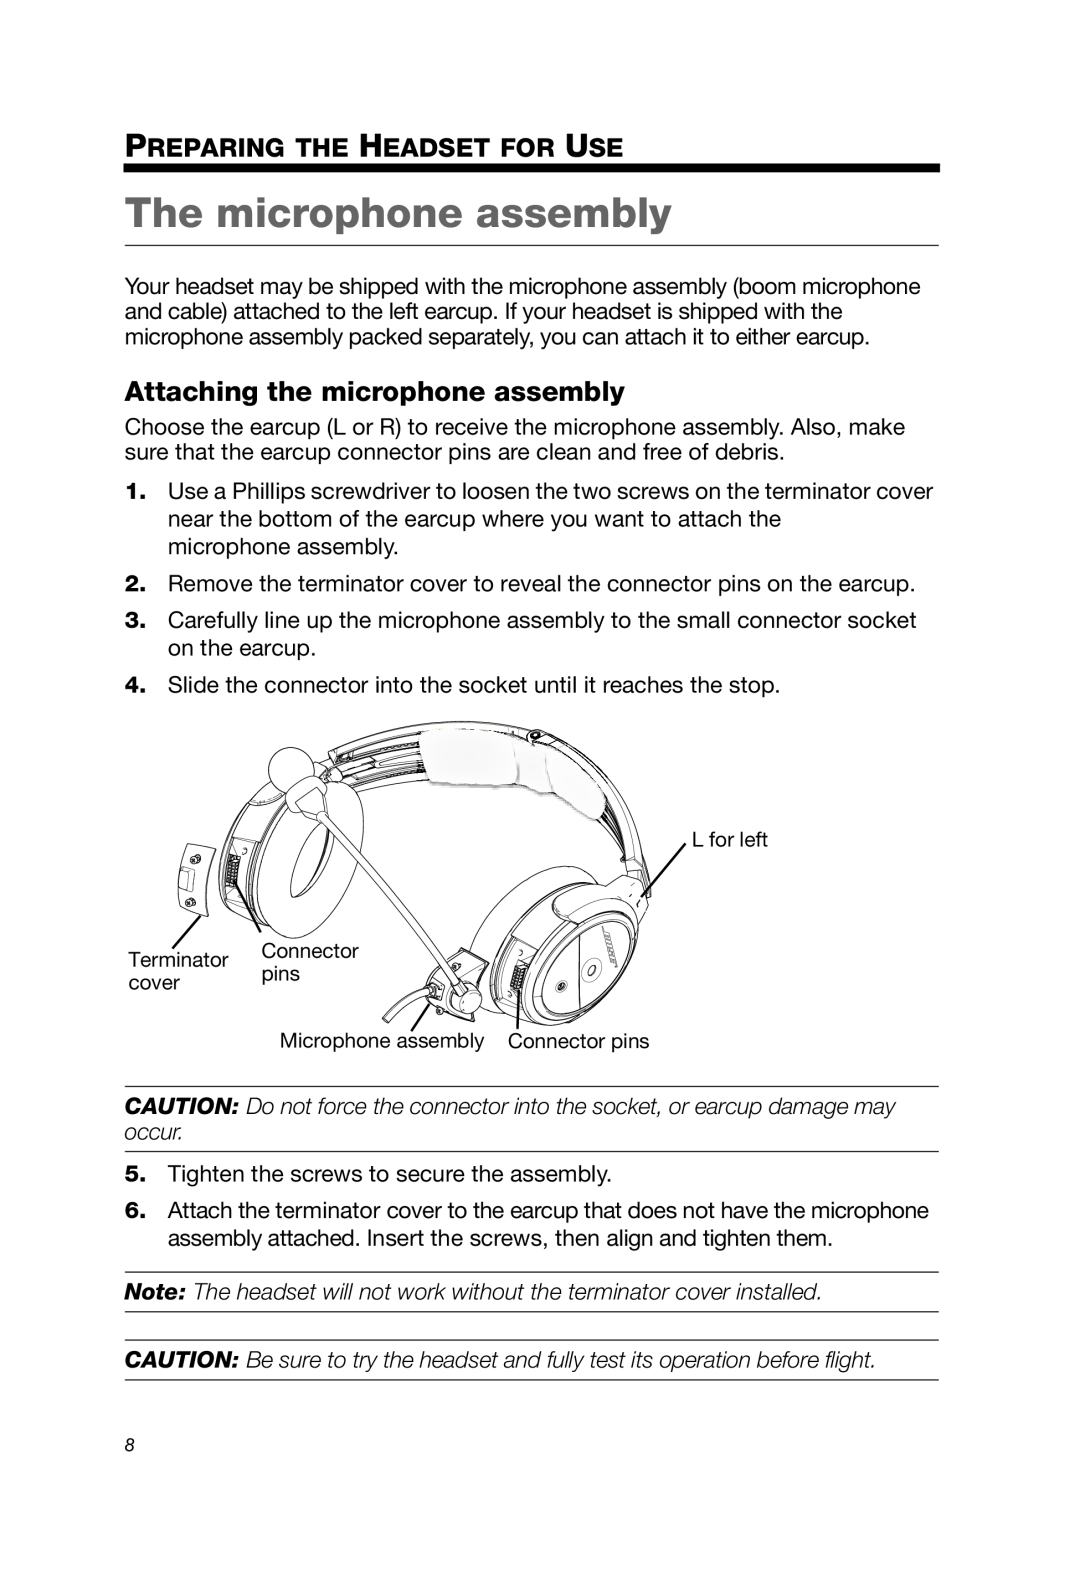 Bose A20 manual The microphone assembly, Attaching the microphone assembly, Preparing The Headset For Use 